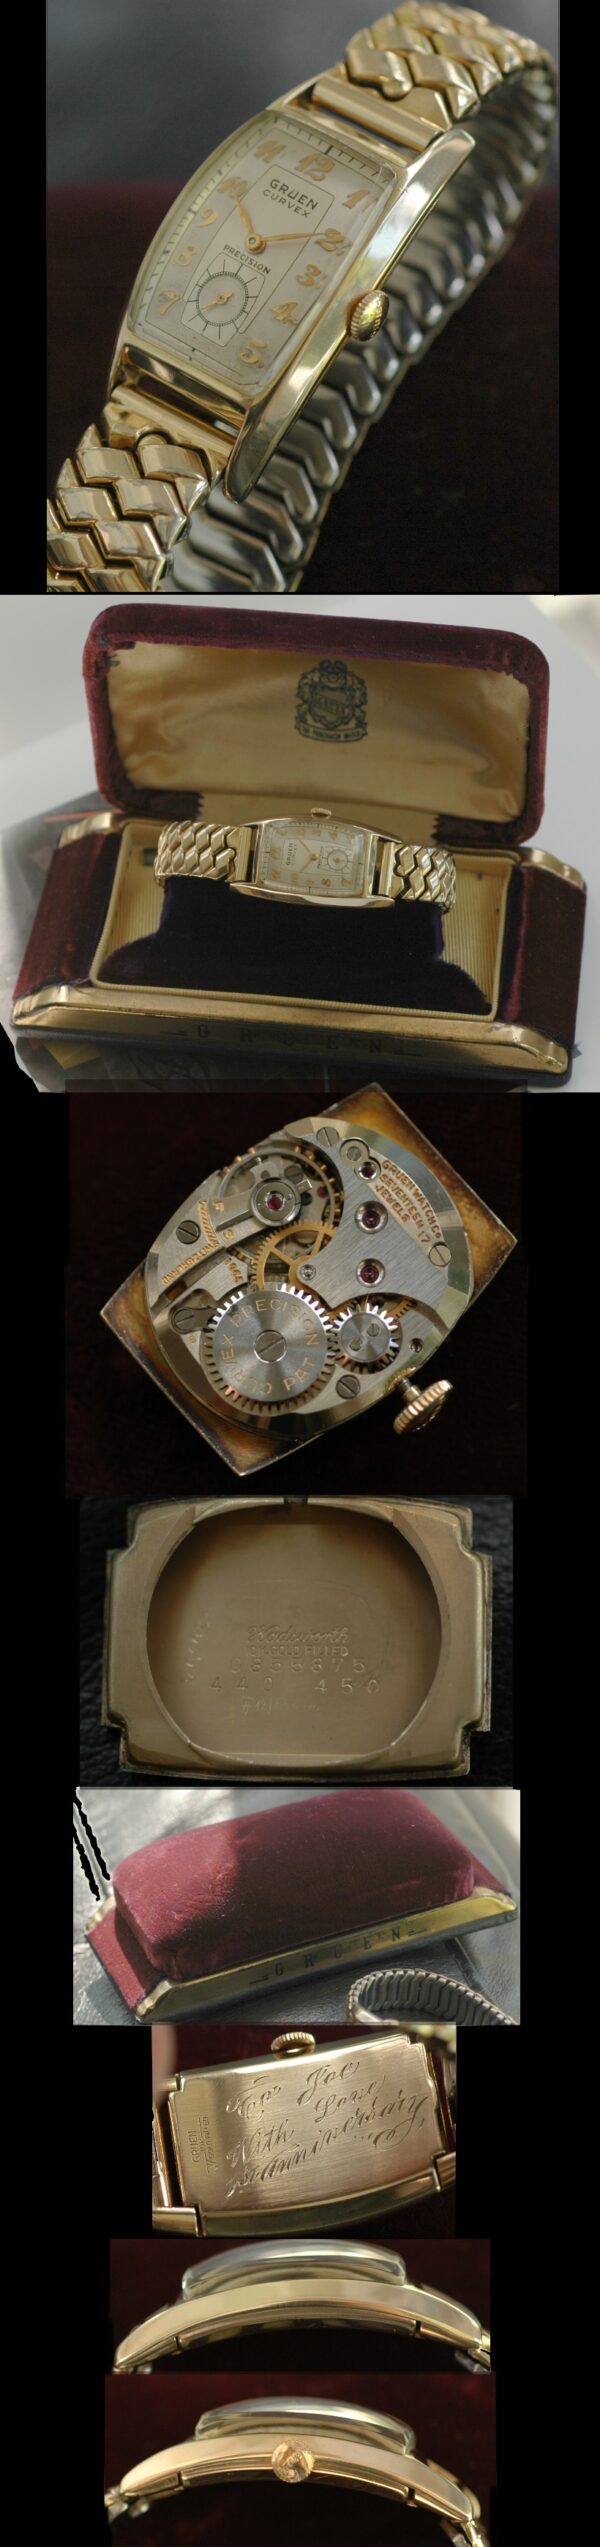 1940s Gruen Curvex gold-filled watch with original velvet box, case, signed winding crown, inscription, and cleaned manual winding movement.